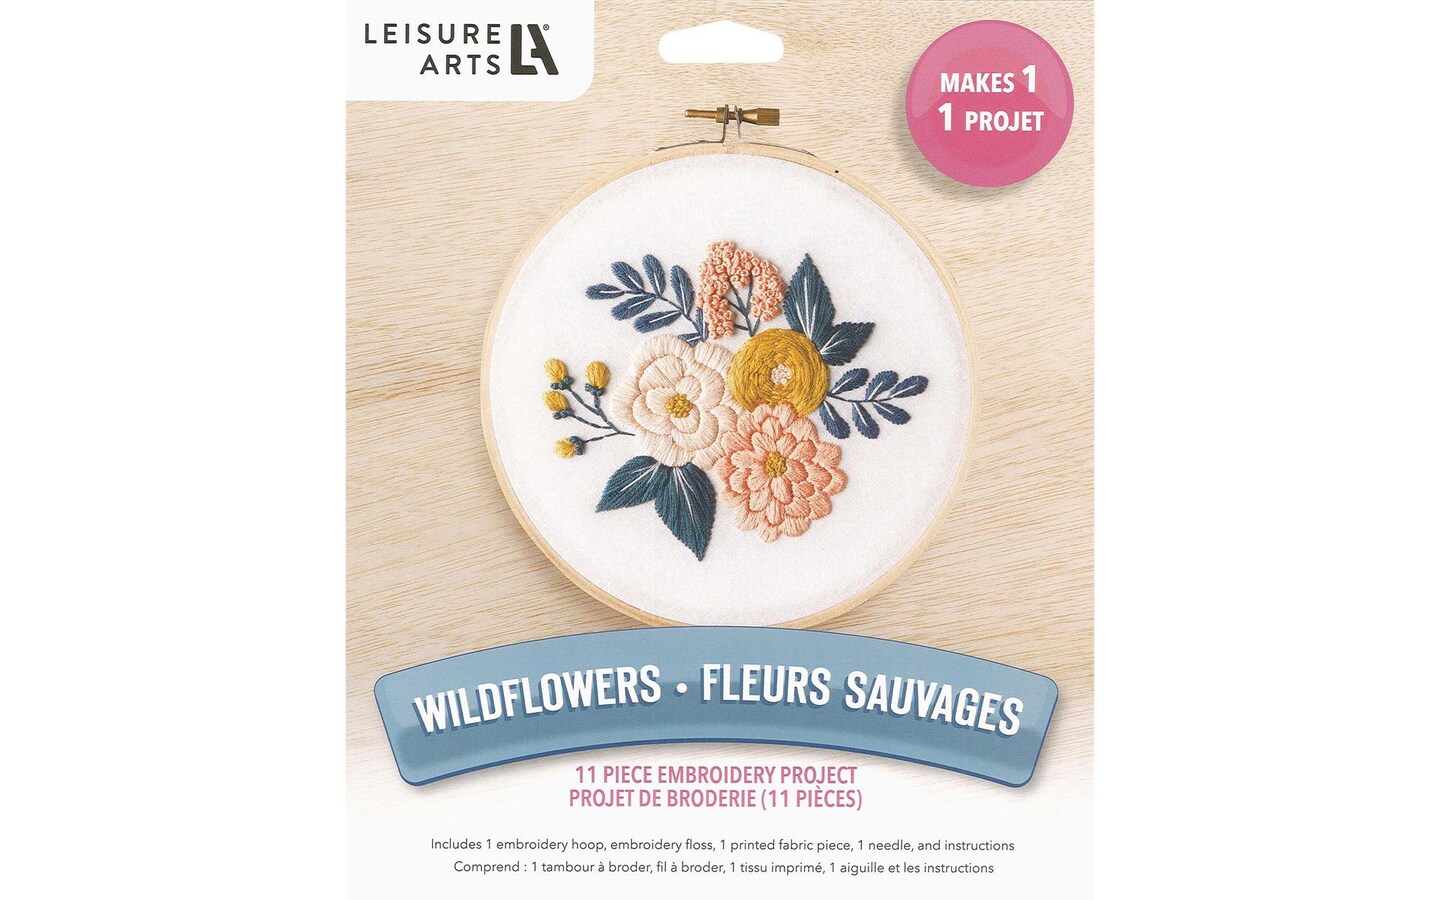 Leisure Arts Embroidery Kit 6 Wildflowers - embroidery kit for beginners -  embroidery kit for adults - cross stitch kits - cross stitch kits for  beginners - embroidery patterns